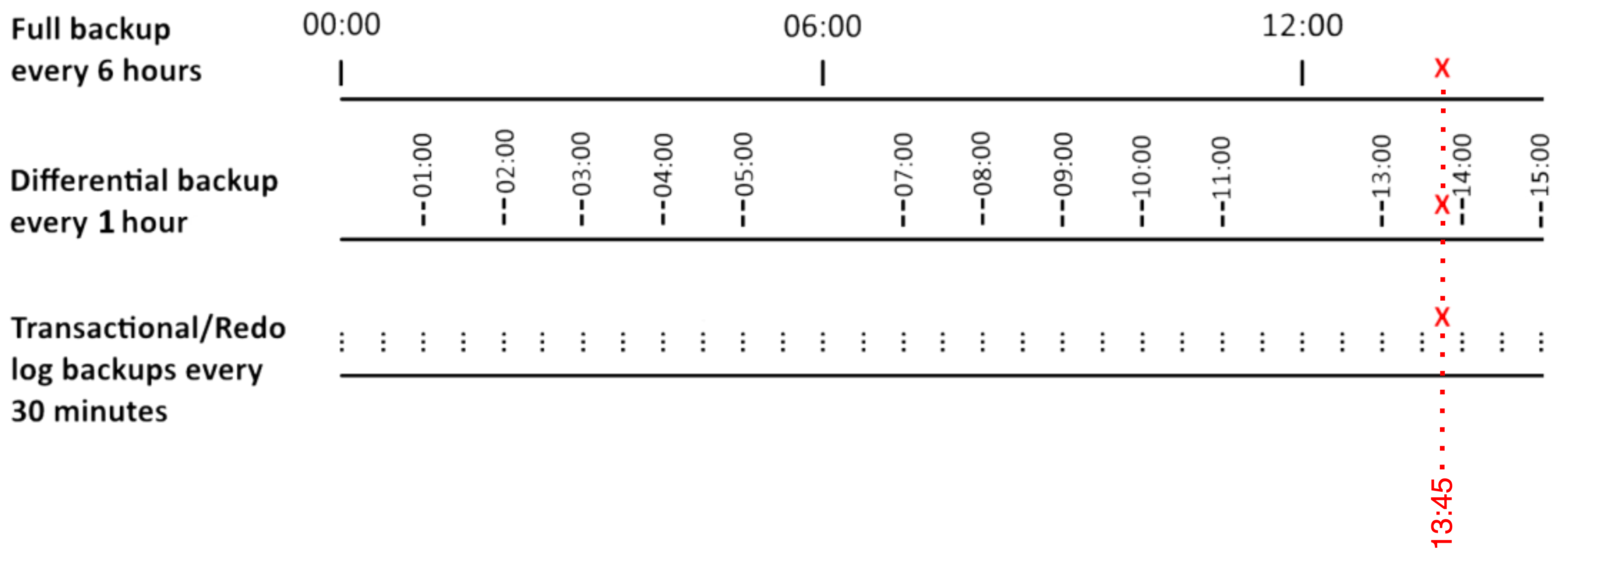 A diagram showing the backup schedules